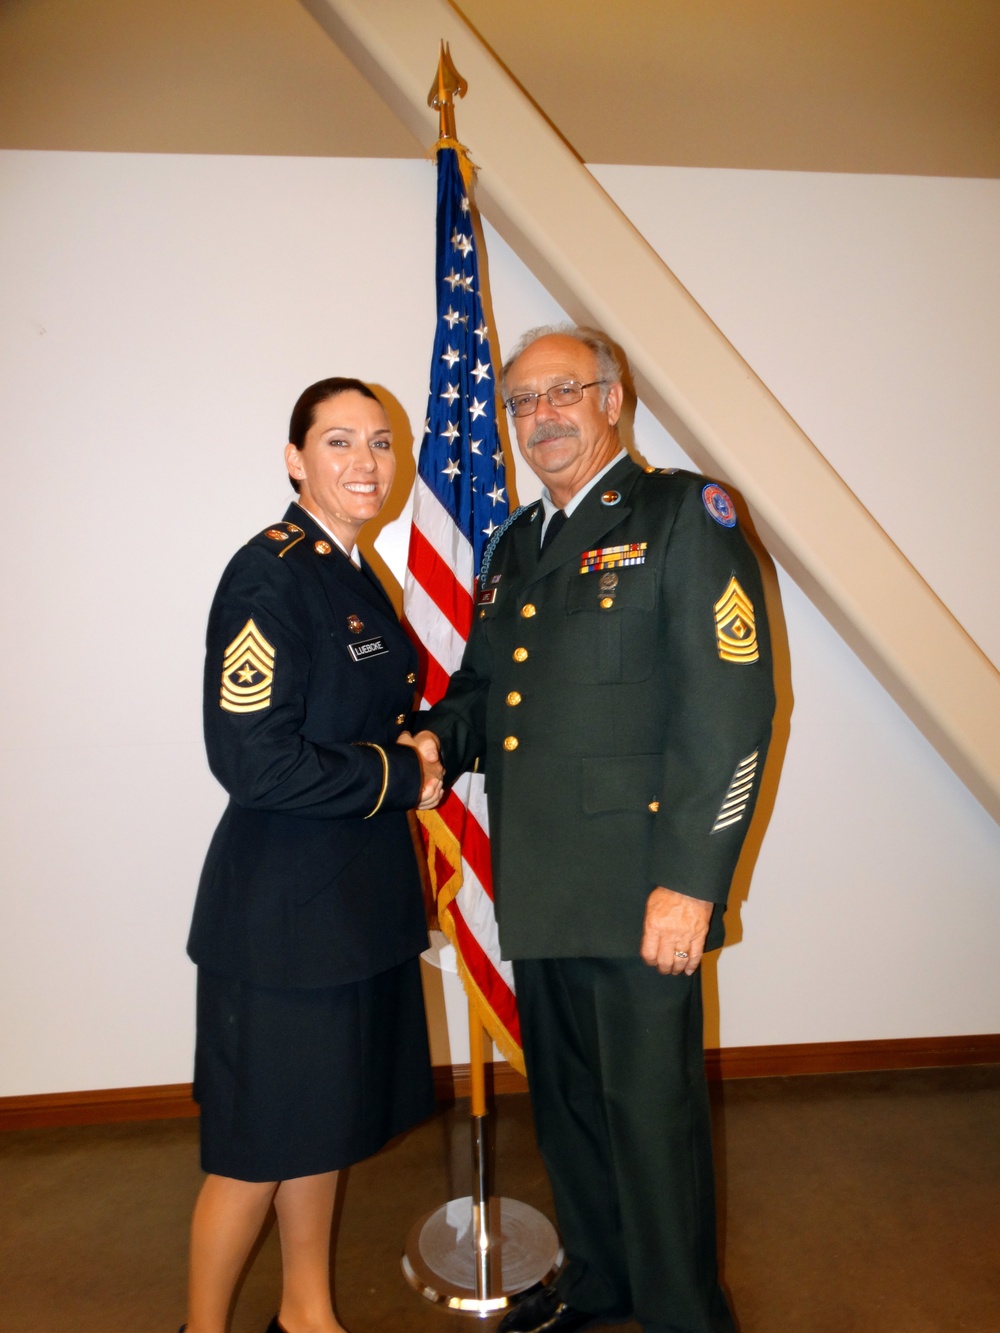 Promotion Ceremony of Sgt. Maj. Luebcke and Master Sgt. Luevano